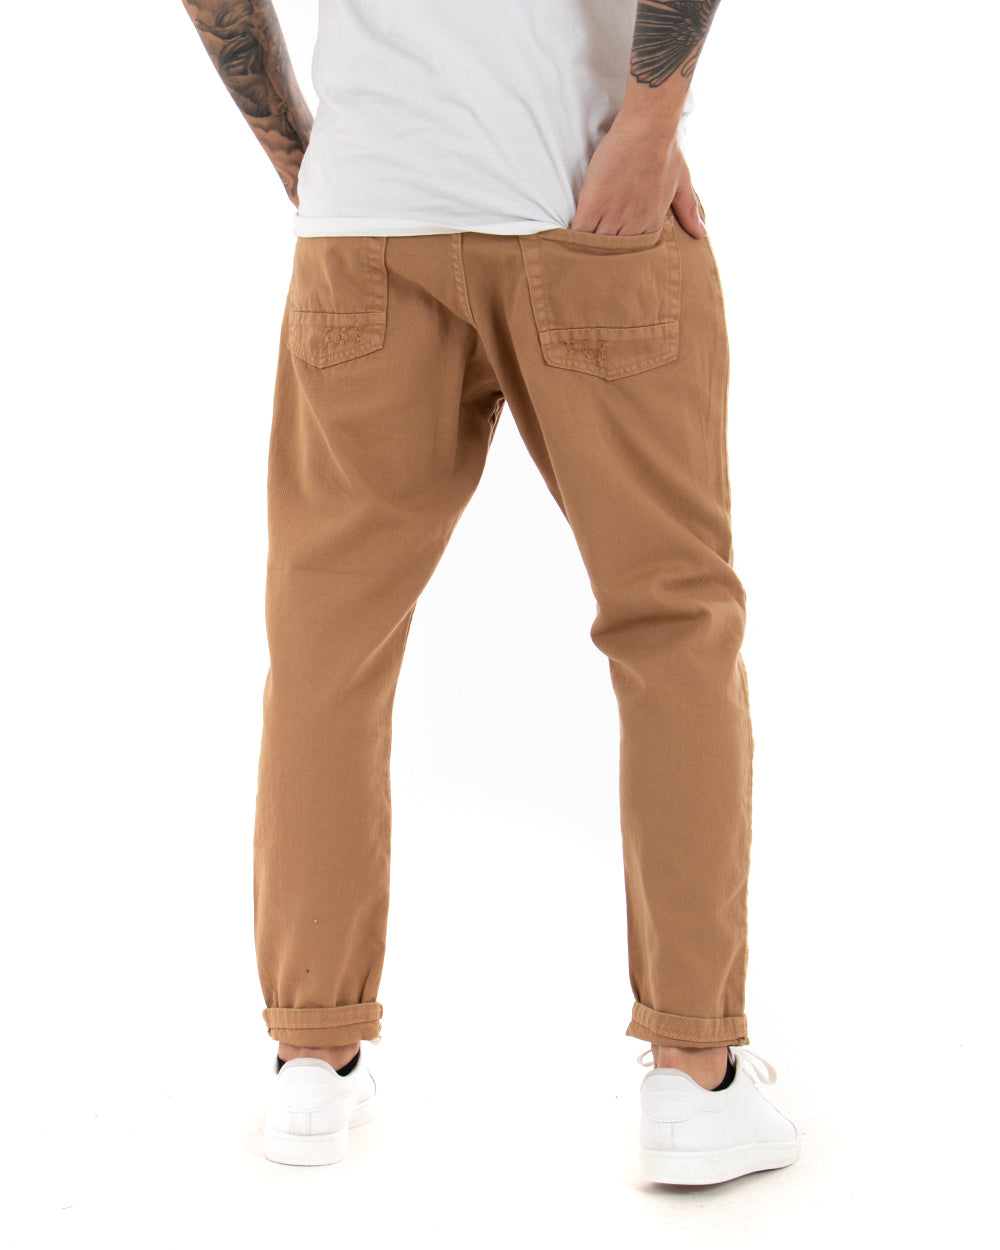 Men's Jeans Trousers Loose Fit Camel With Rips Five Casual Pockets GIOSAL-P4088A